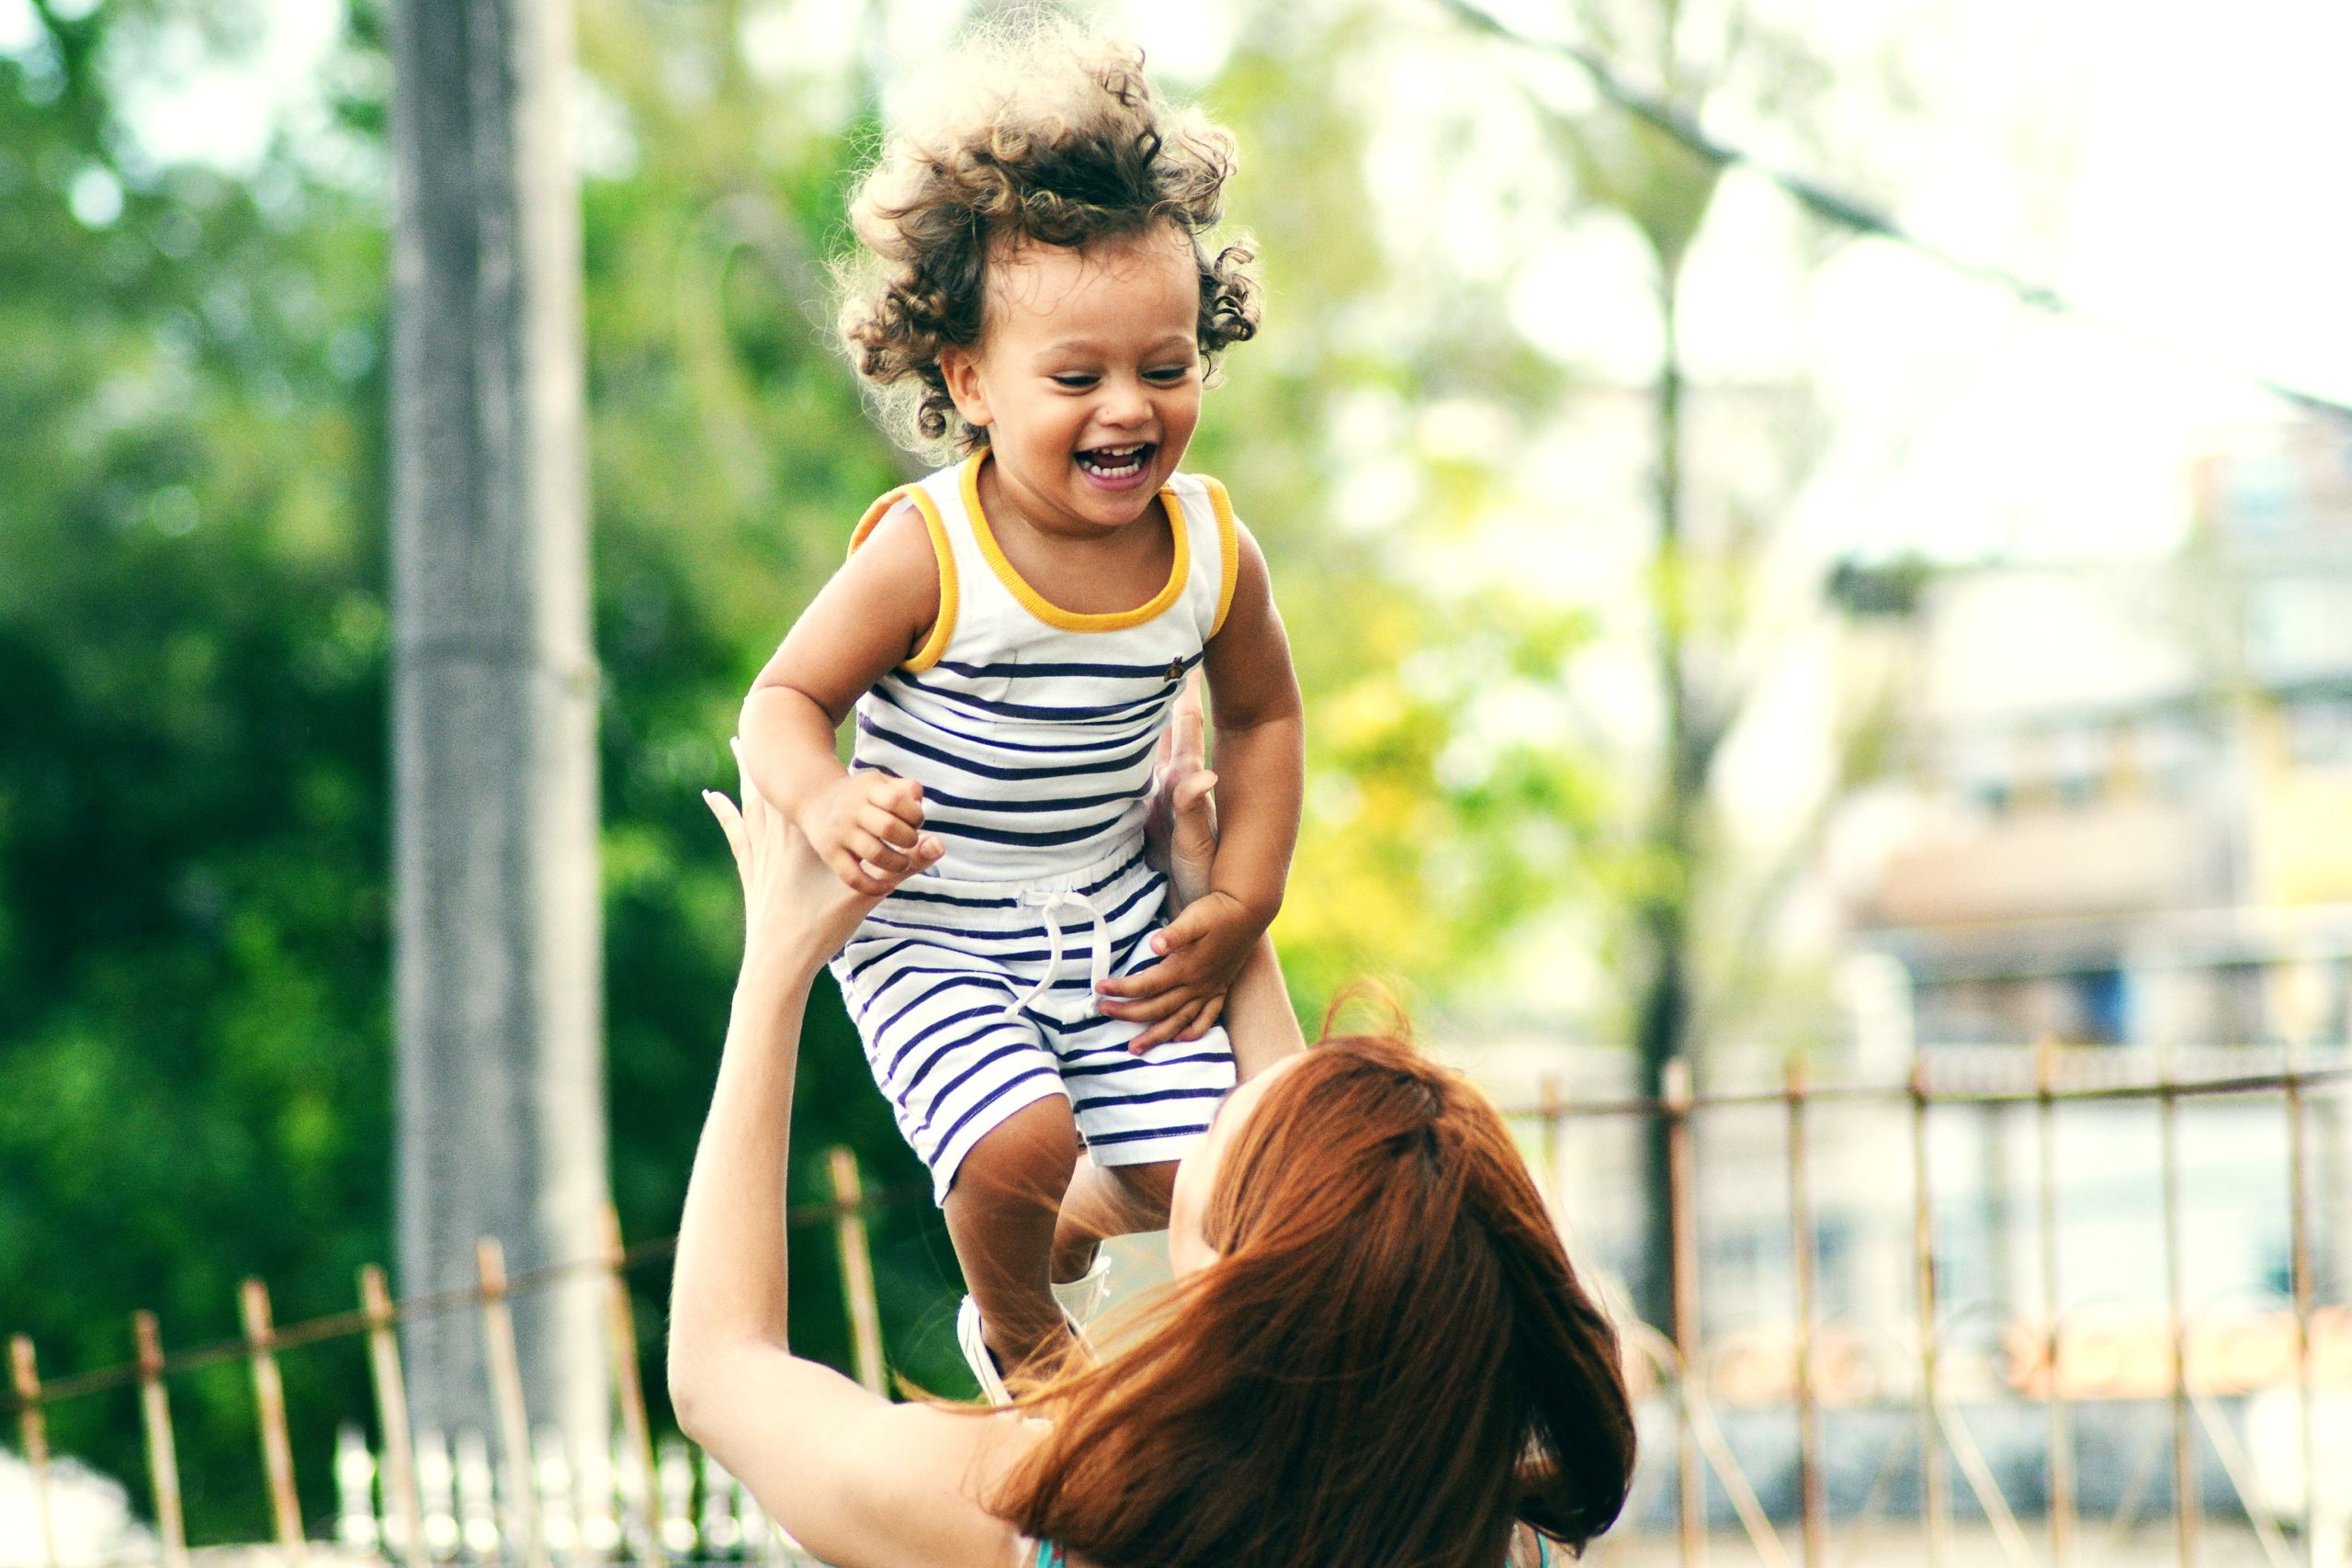 Child smiling and being held in the air by her mother outdoors.